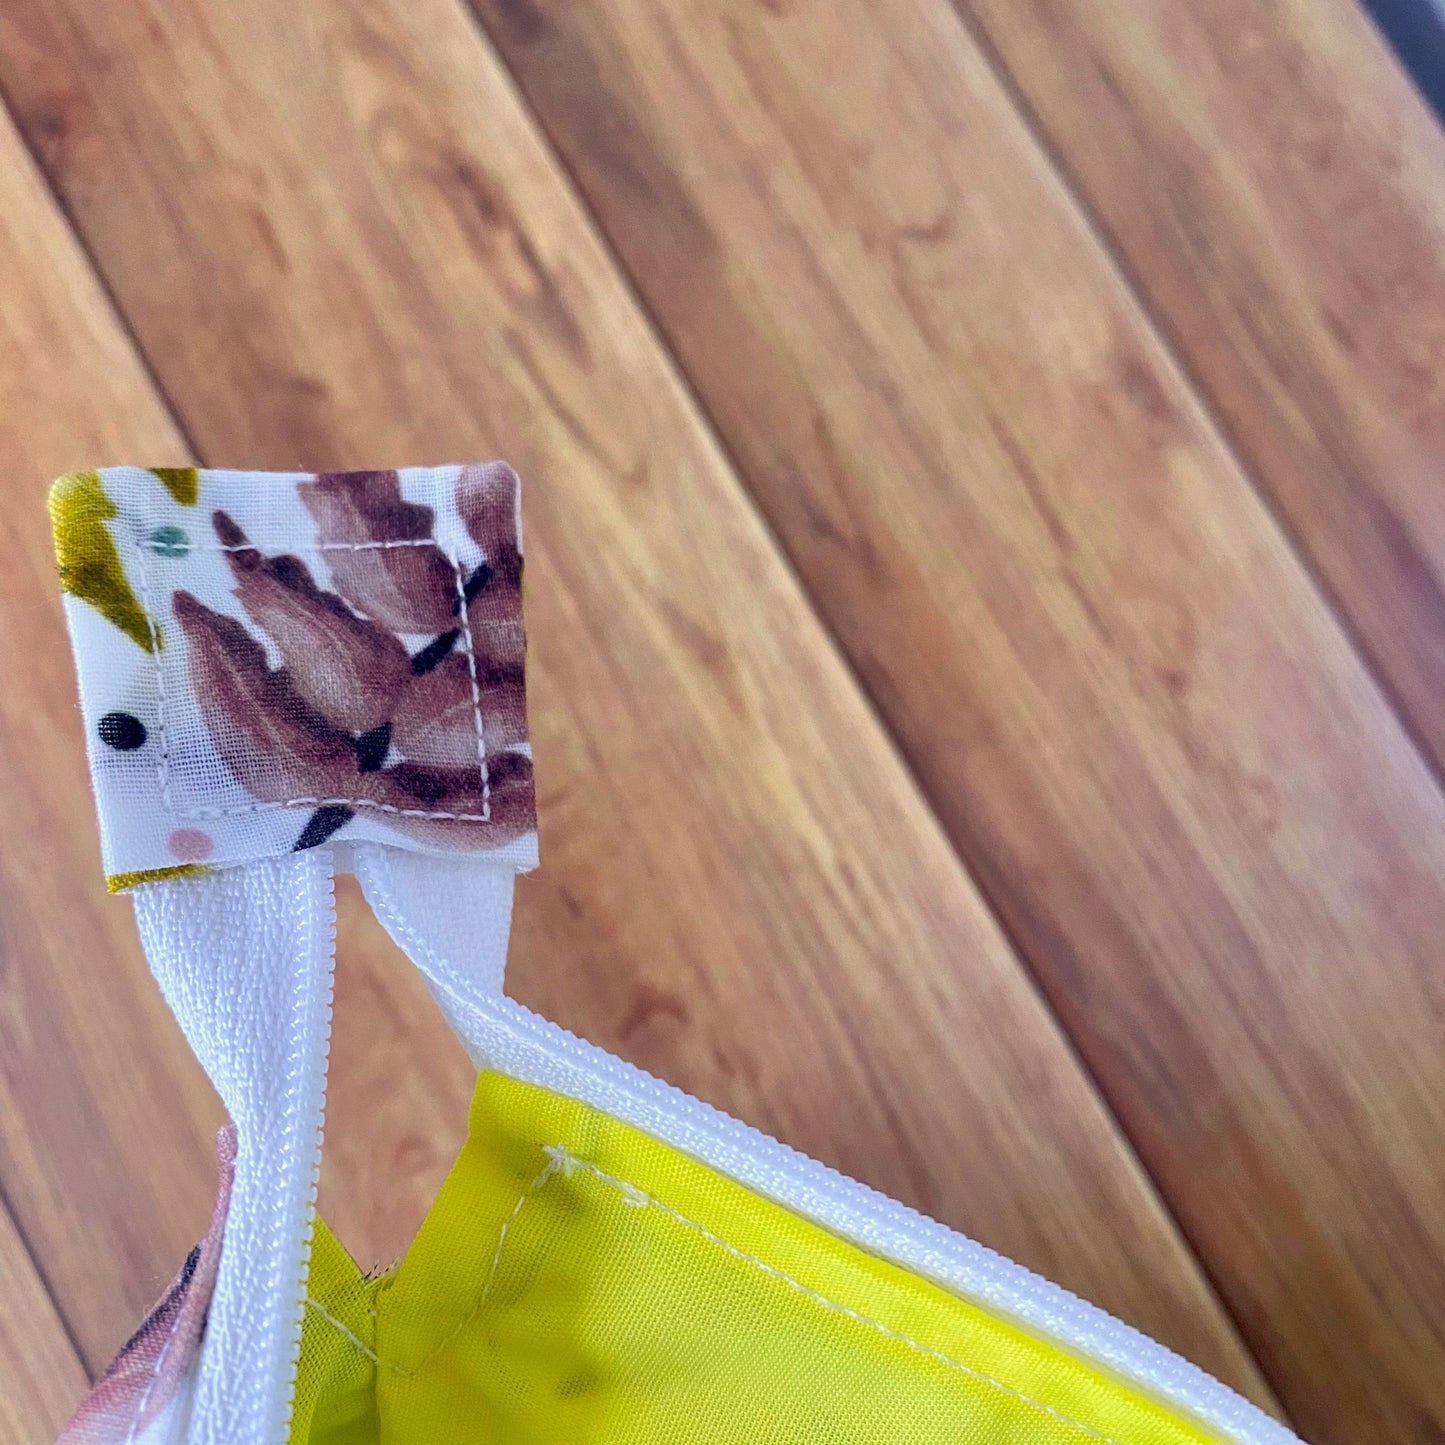 Closeup of the open zip of the makeup bag, showing the surface pattern design on the end of the zip, and the bright yellow lining on the inside.